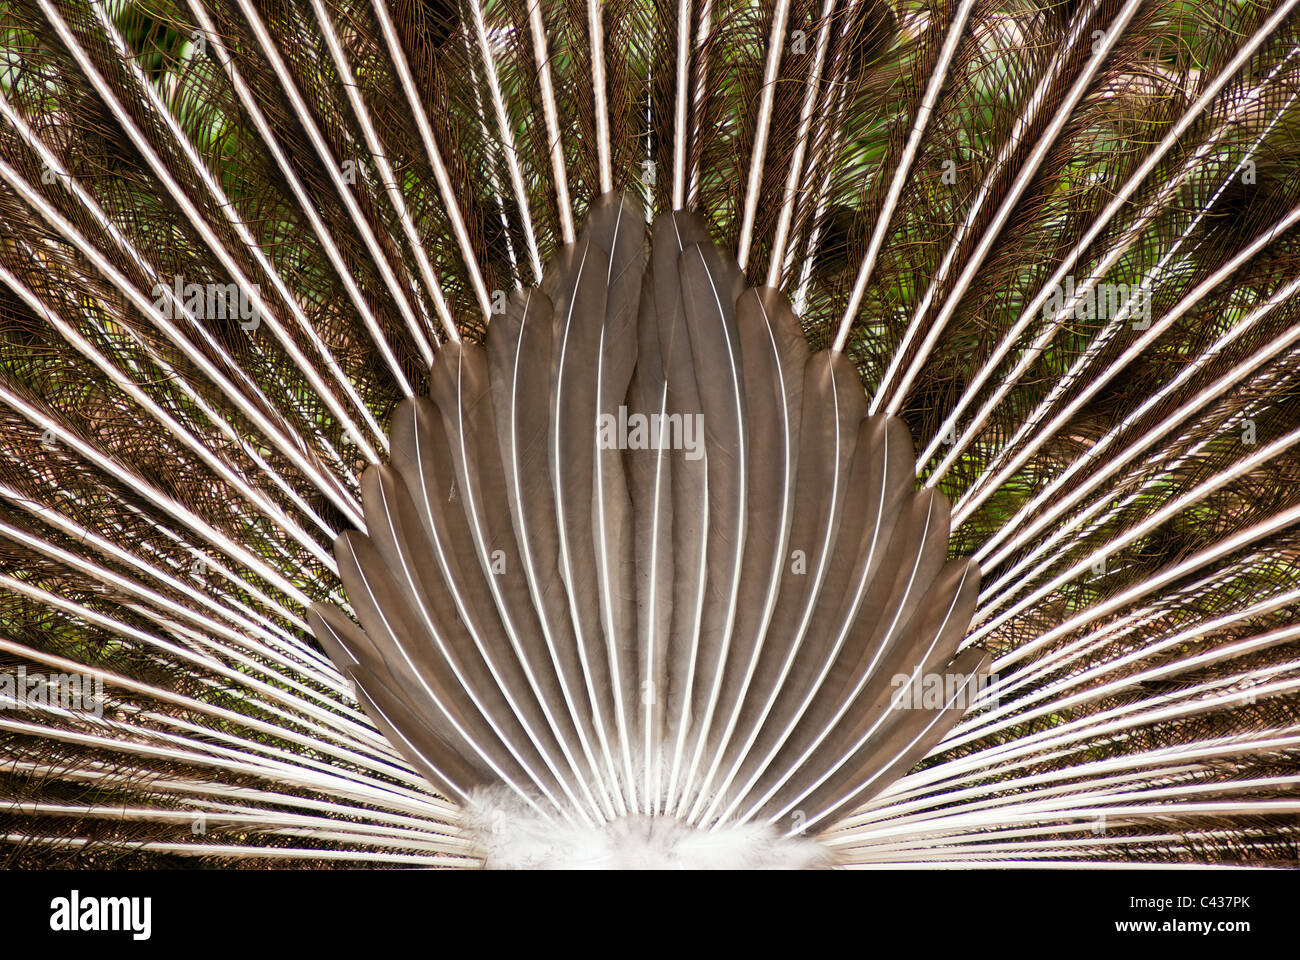 Rear view of a peacocks tail feathers Stock Photo